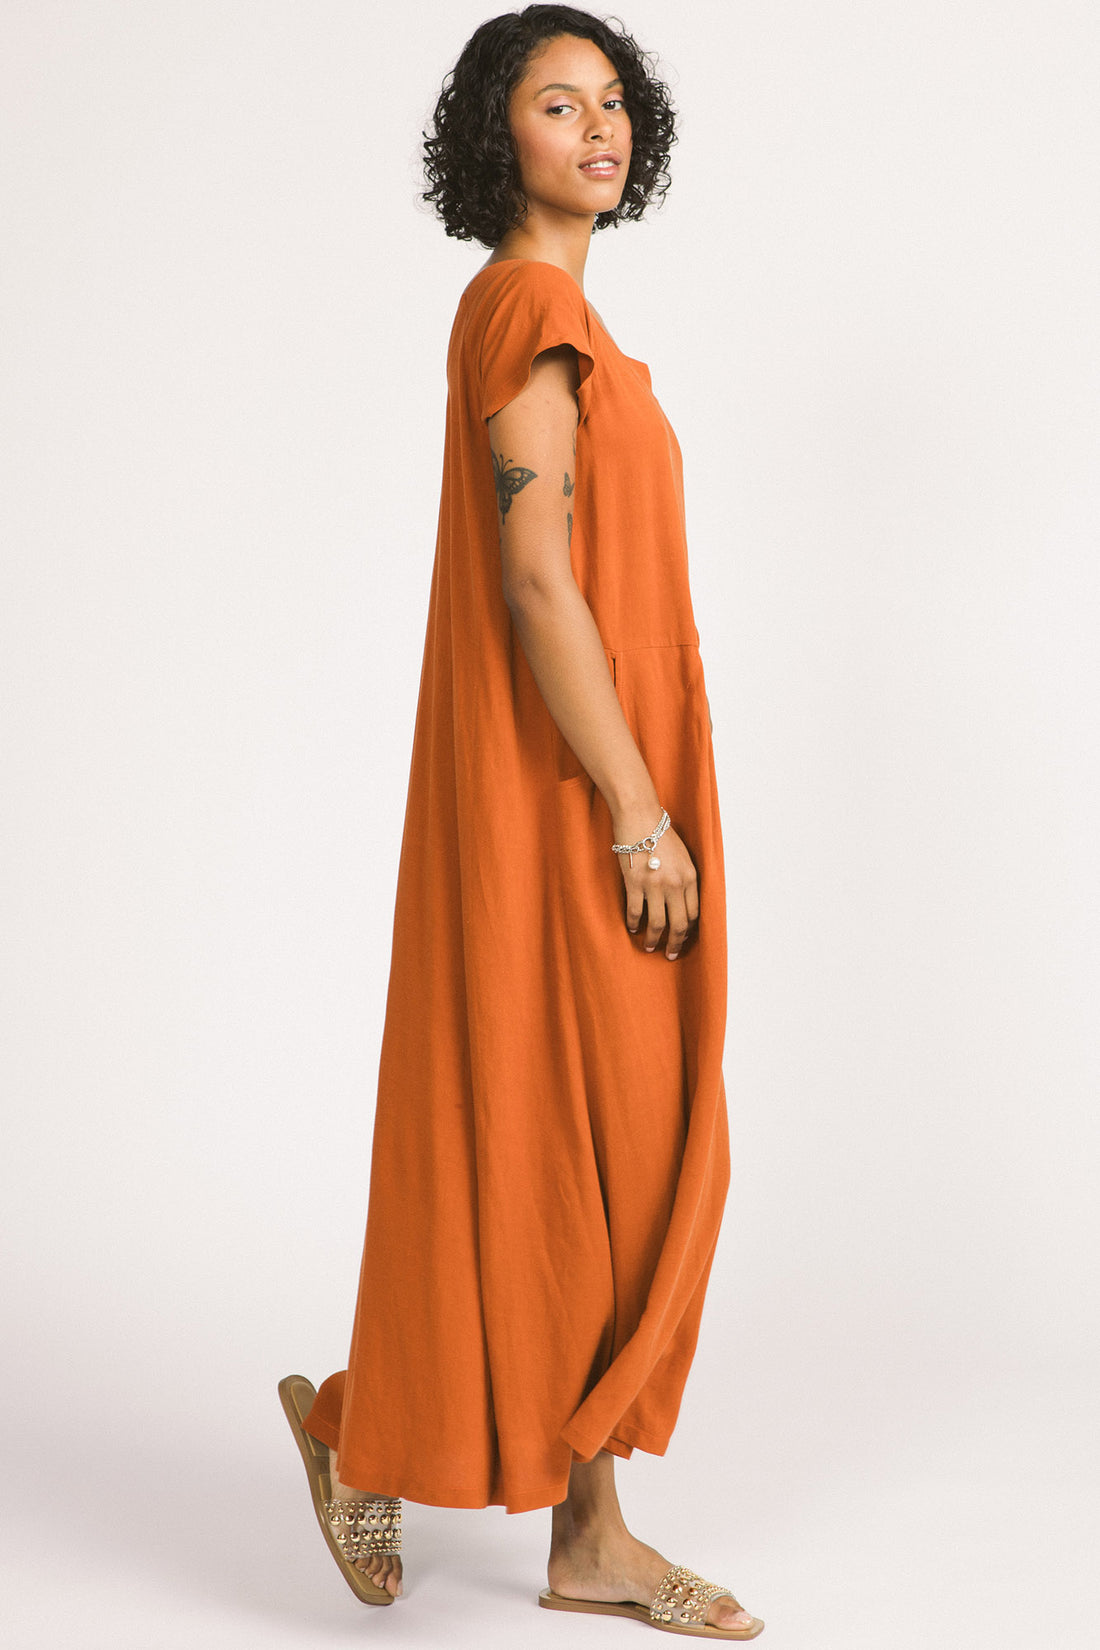 Enola Dress by Allison Wonderland, Rust, voluminous maxi dress, scoop neck front and back, short raglan sleeves, front horizontal seam with gathers below the natural waist, pockets, matching belt, eco-fabric, viscose, linen, sizes 2-12, made in Vancouver